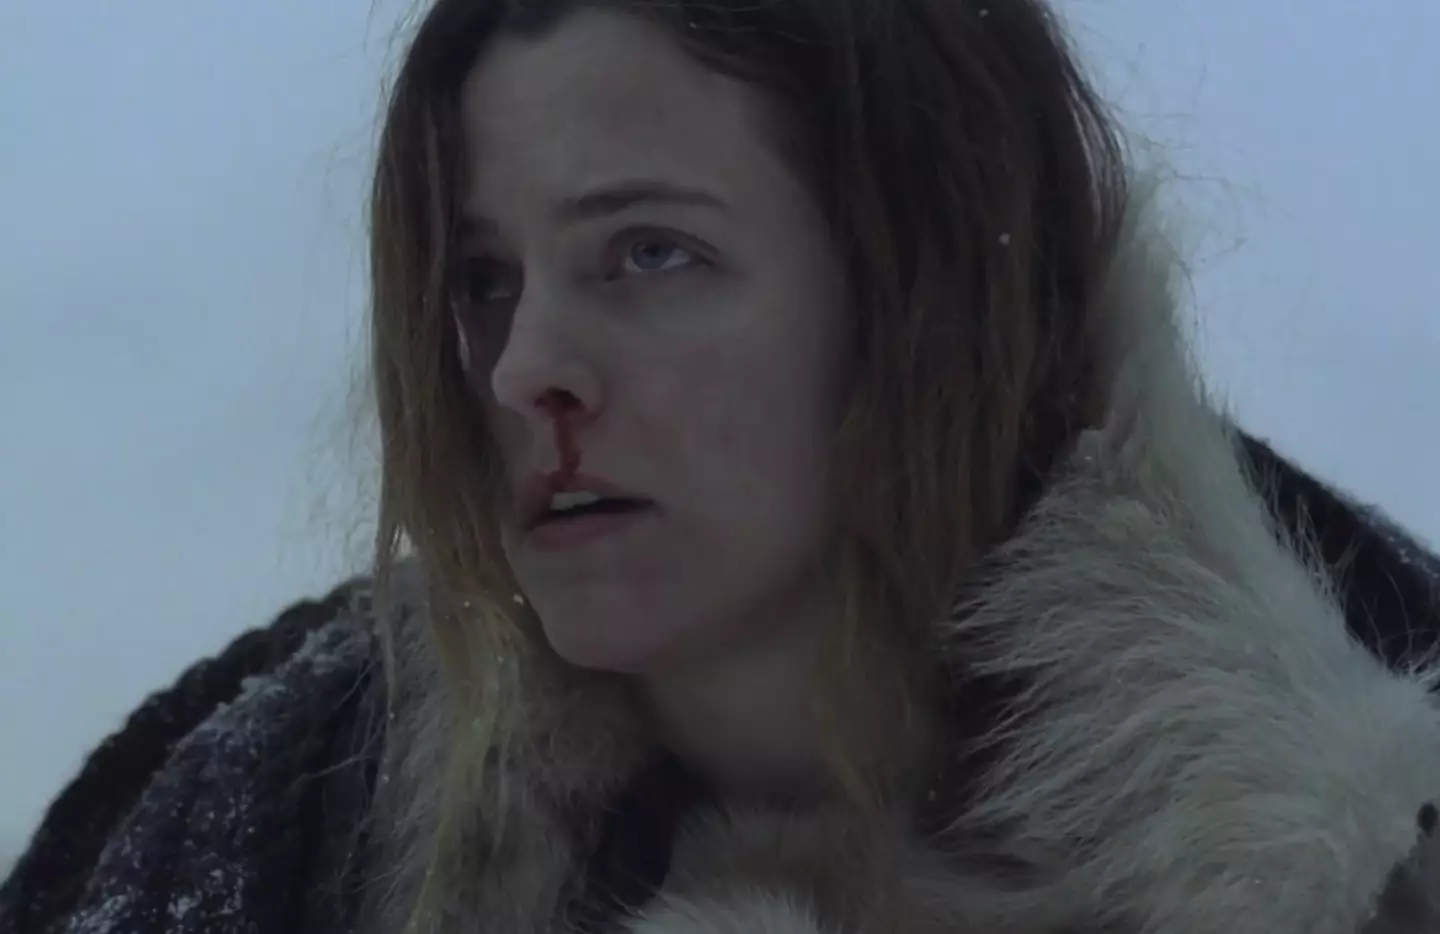 Riley Keough's character Grace takes her own life in the movie.